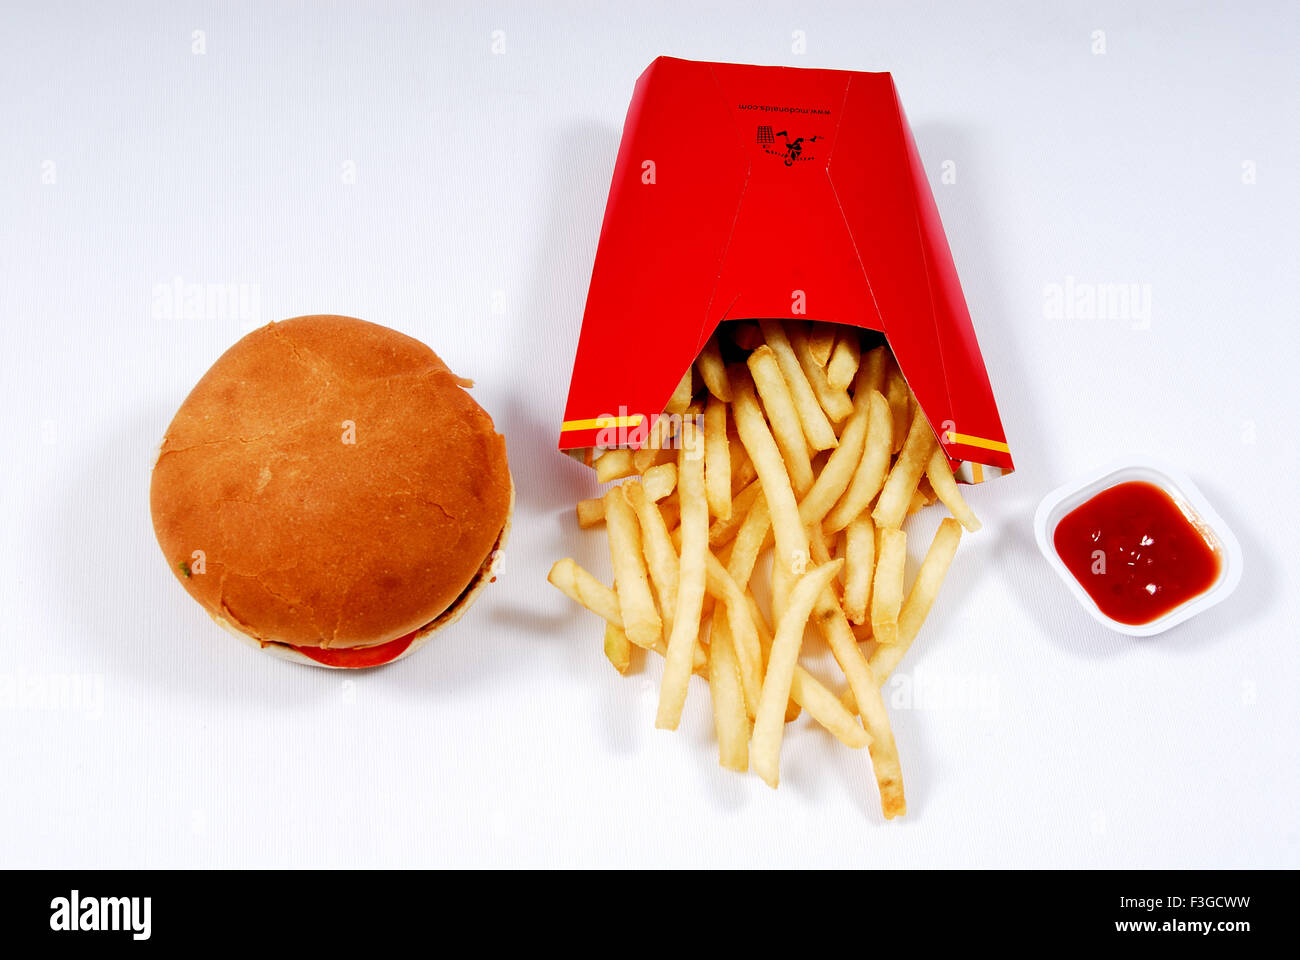 Fries burger and ketchup on white background Stock Photo